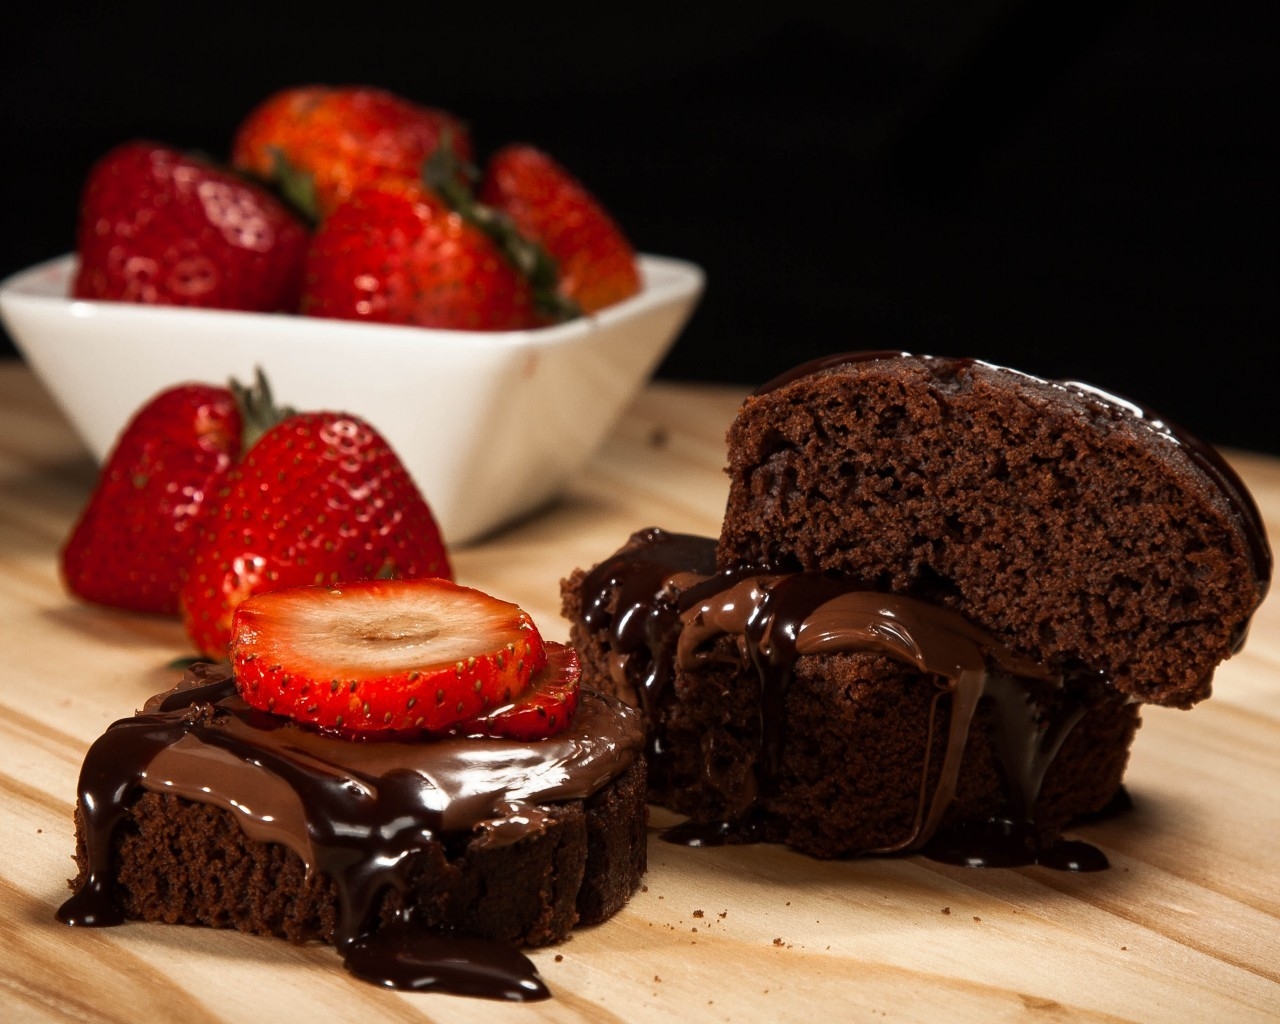 Chocolate and Strawberry Cake for 1280 x 1024 resolution